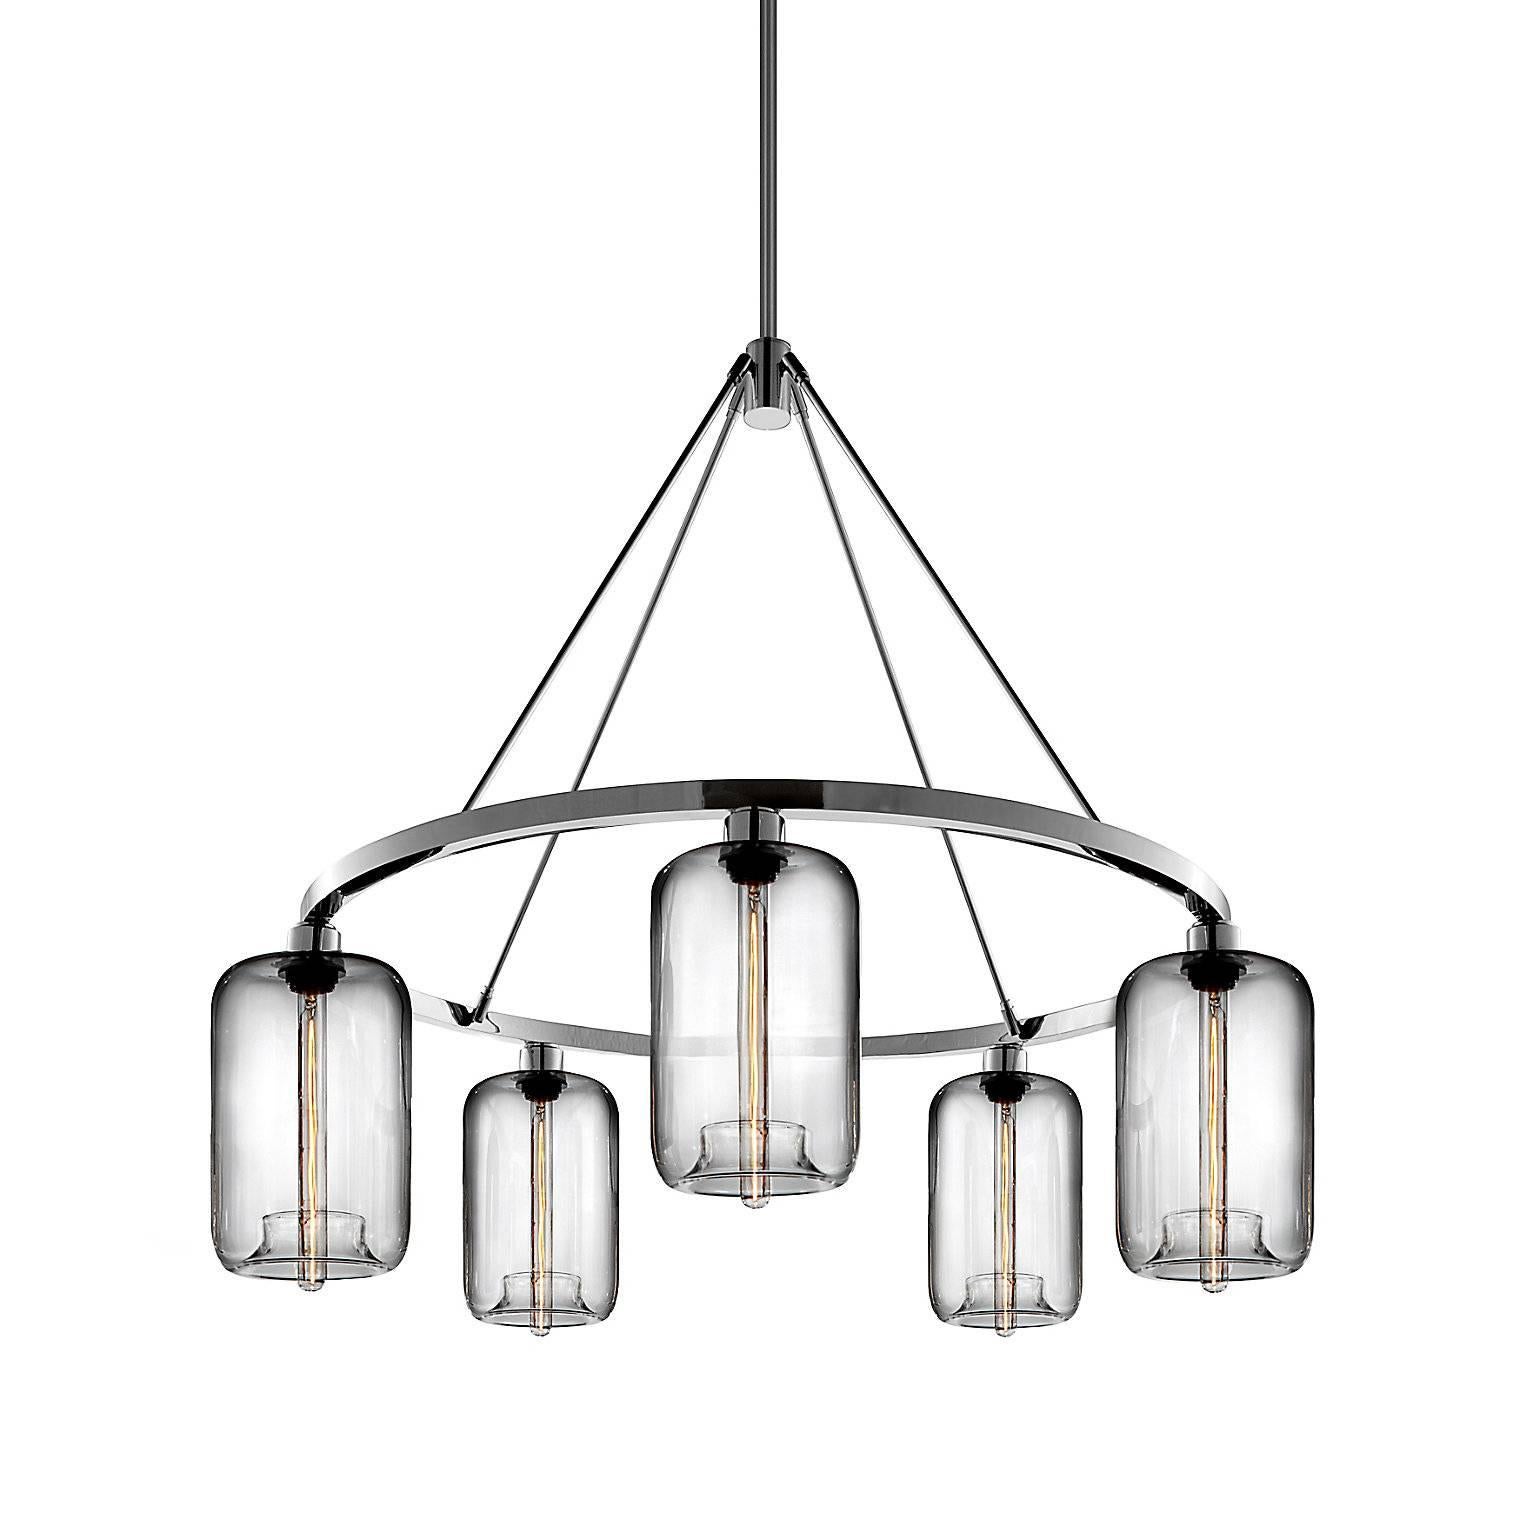 A statement piece designed to attract attention to the brilliant Pod pendant, this chandelier captivates as it suspends elegant hand-blown shades. Every single glass light that comes from Niche is hand-blown by real human beings in a